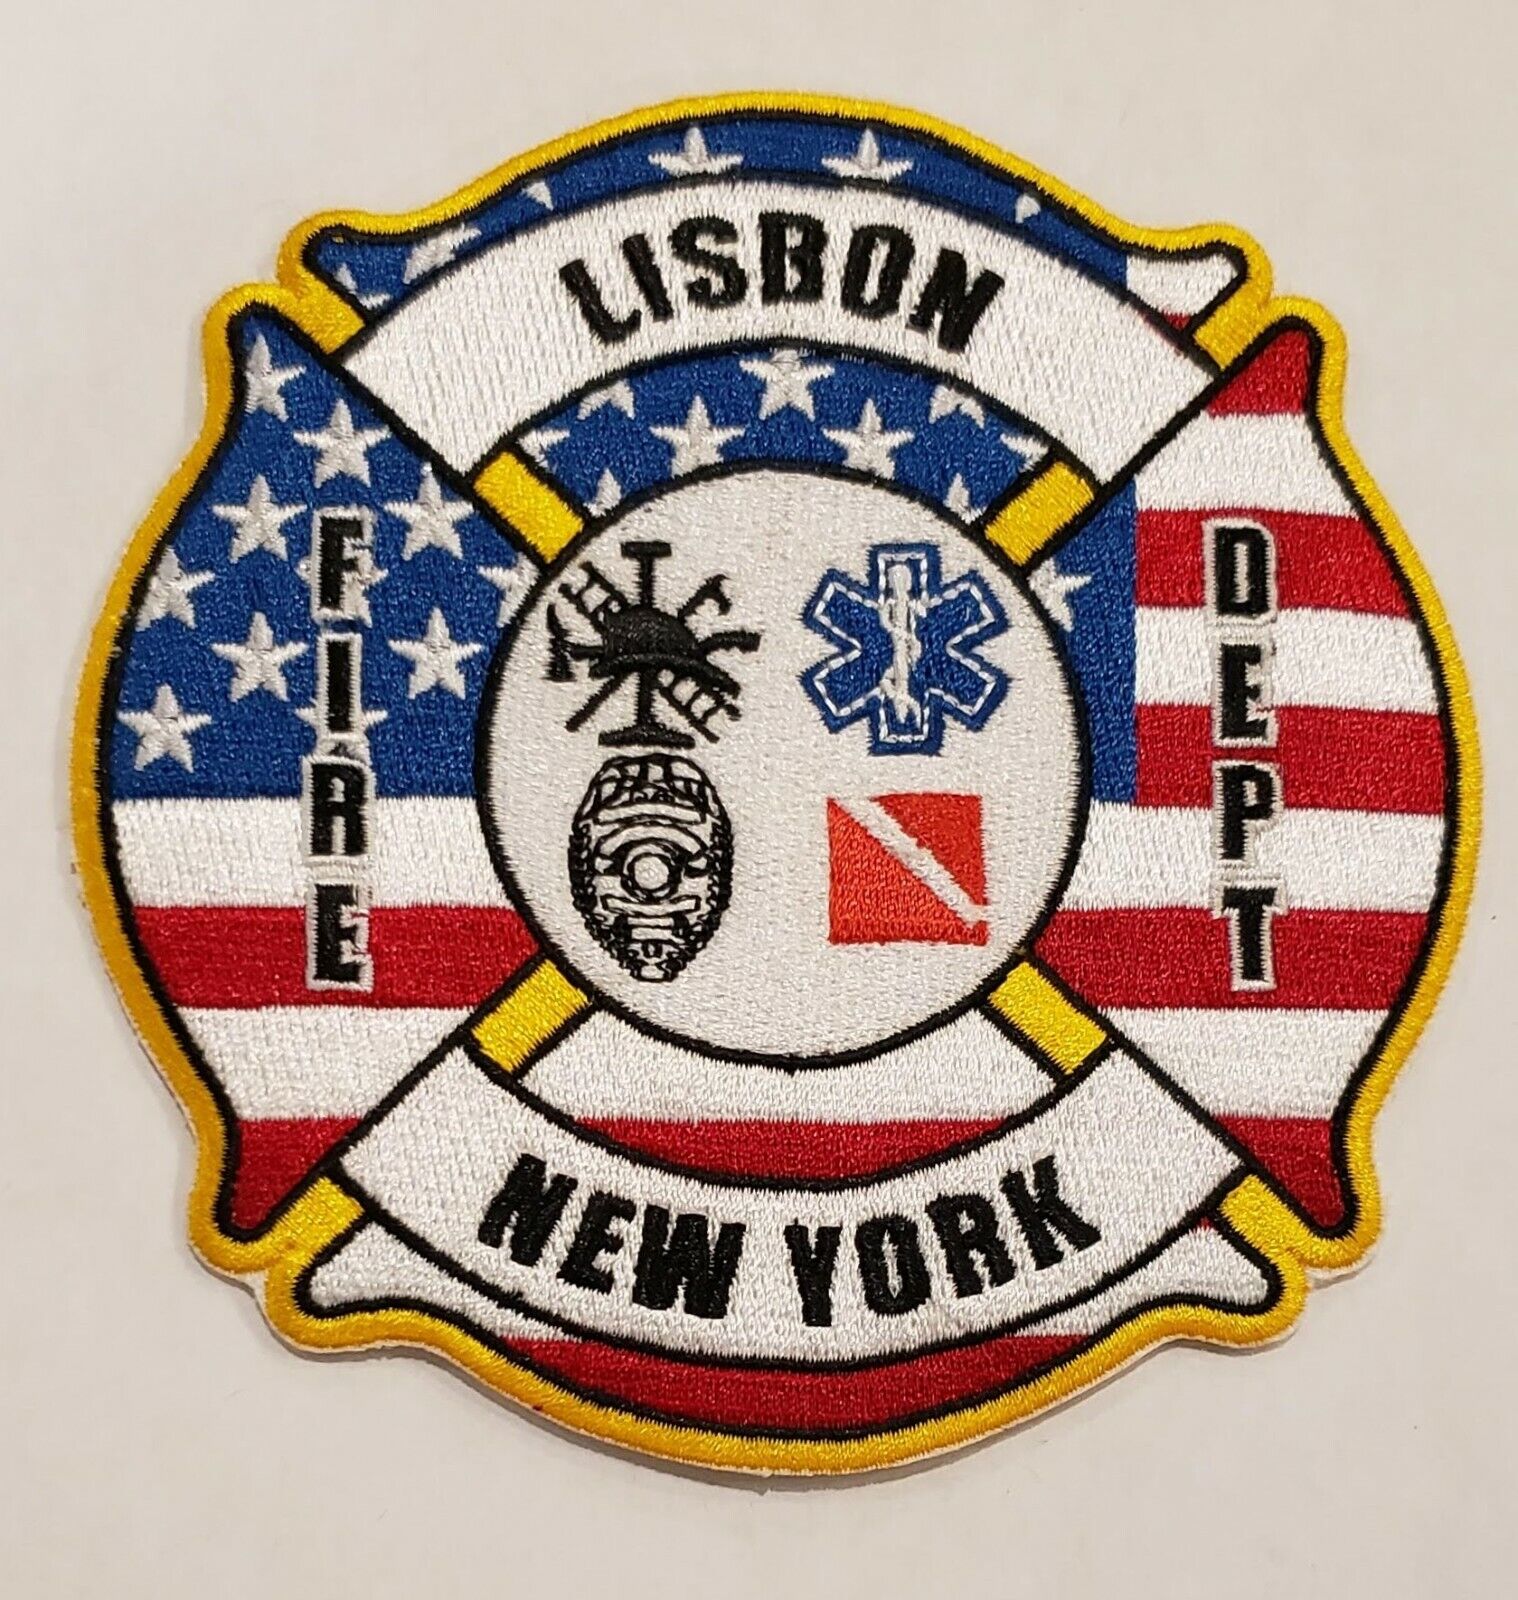 Lisbon (NY) Fire Department Patch FD